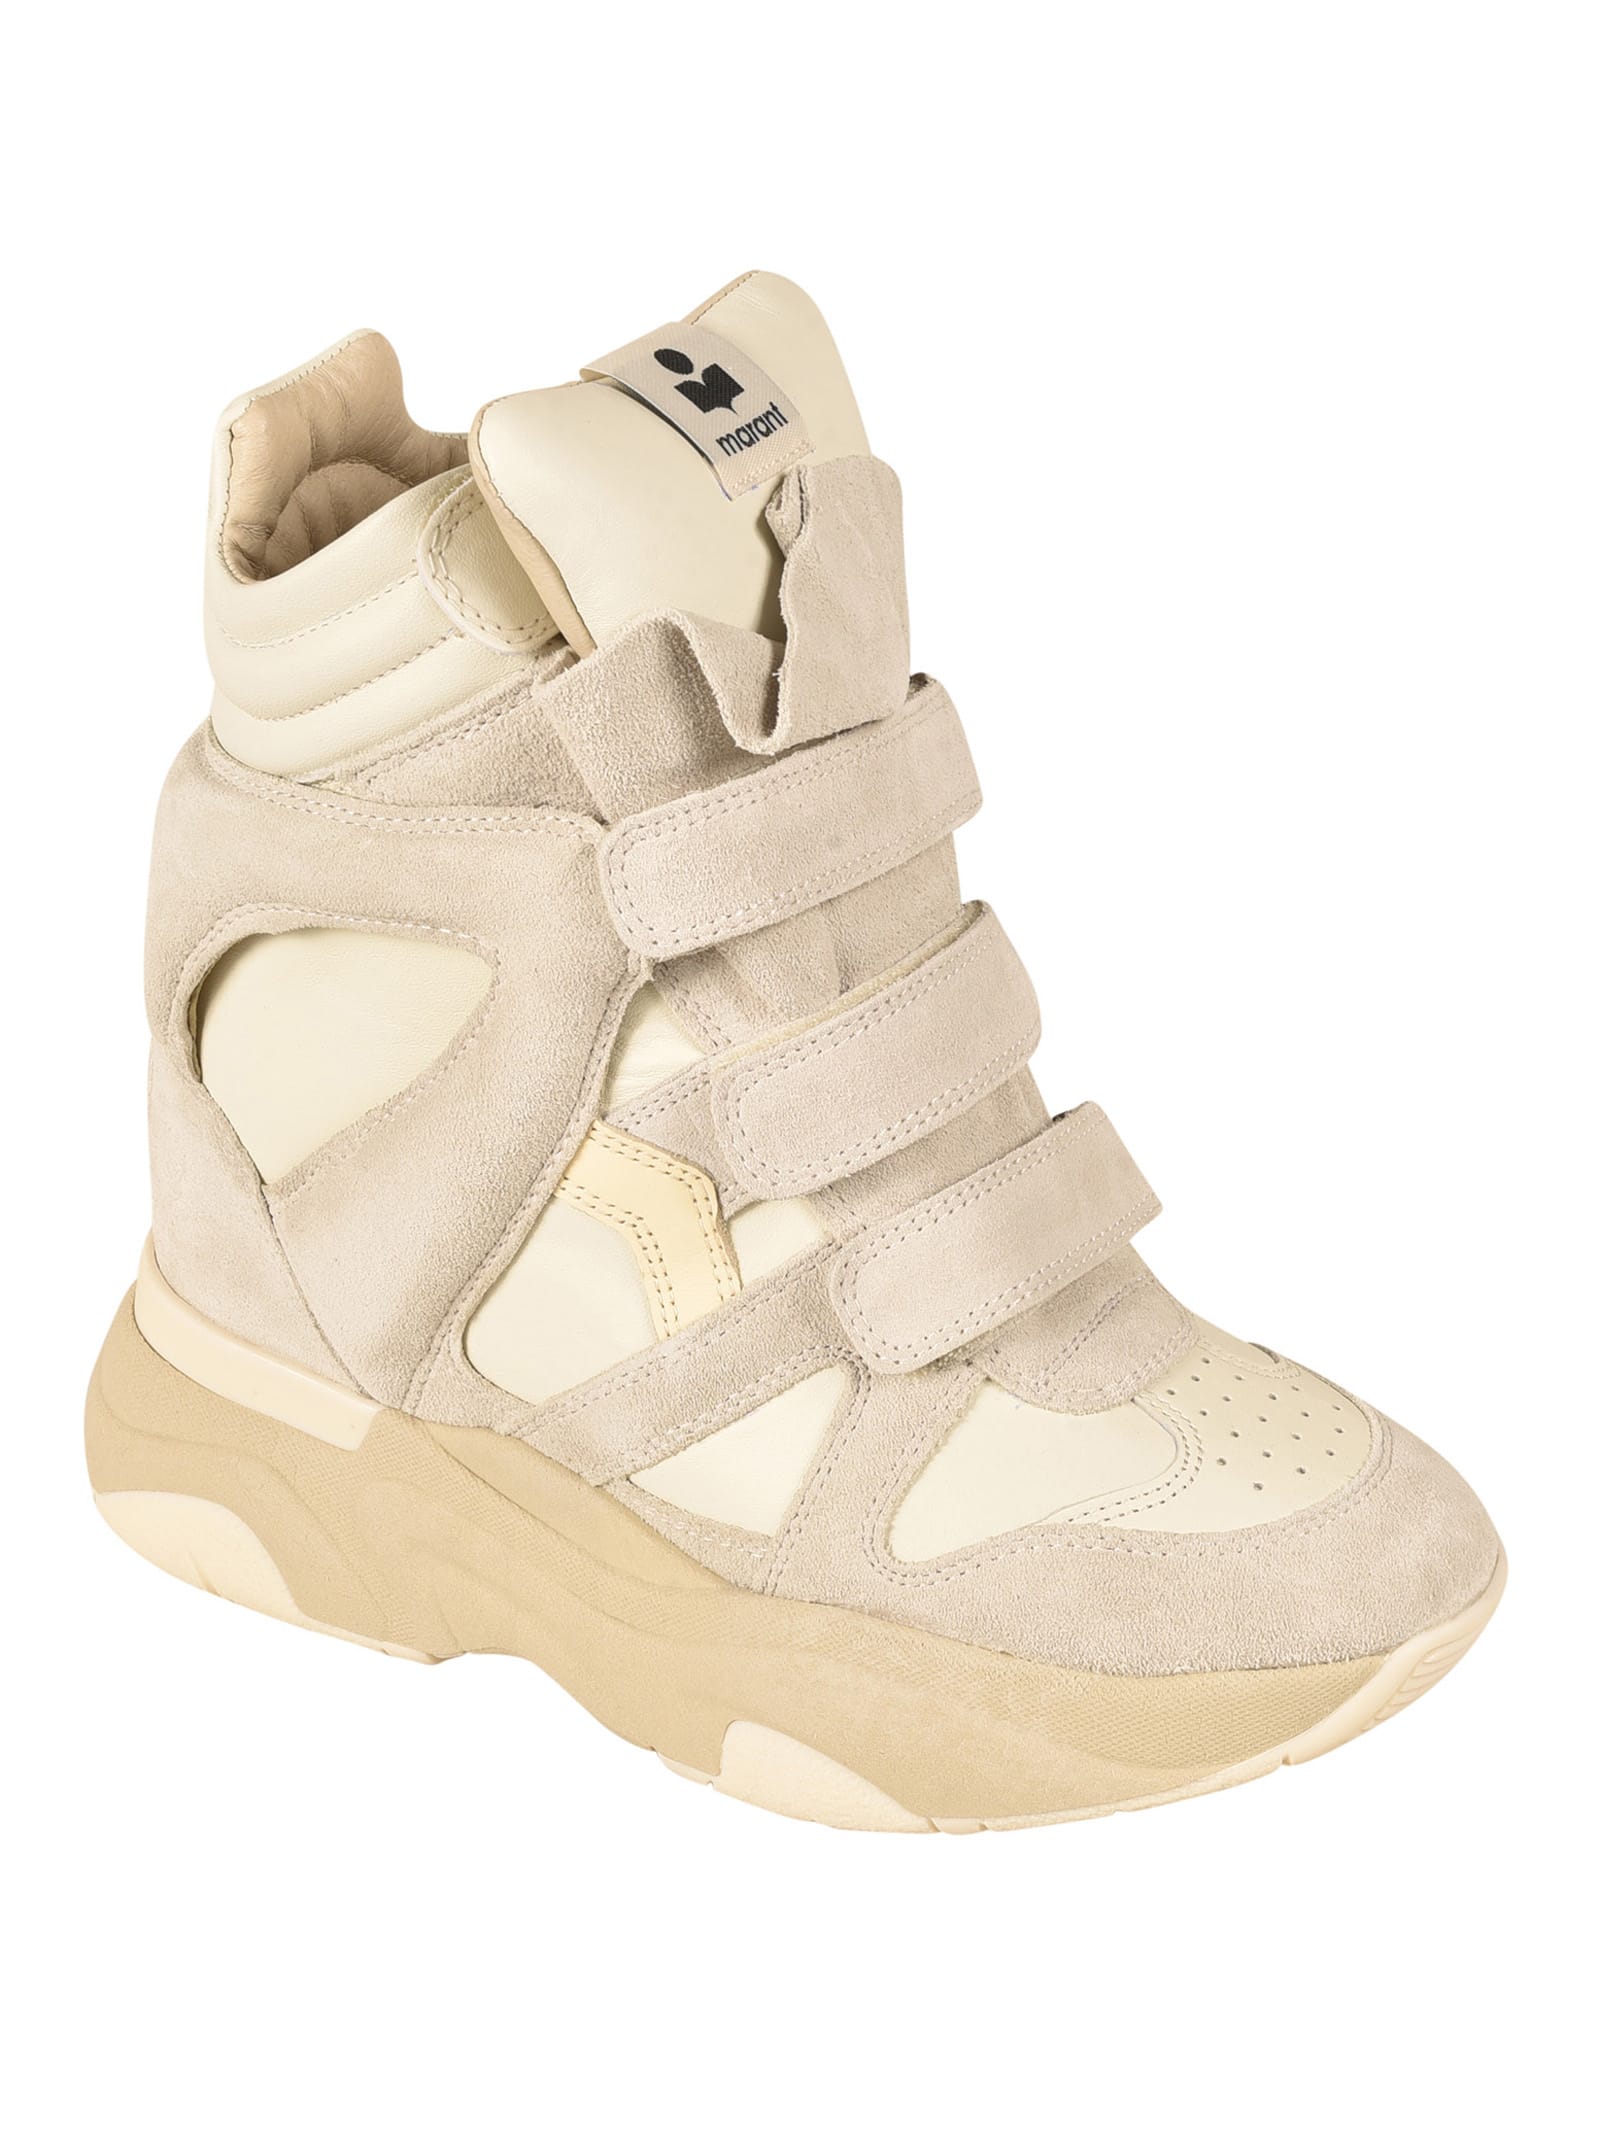 Isabel Marant Classic Balskee Sneakers |